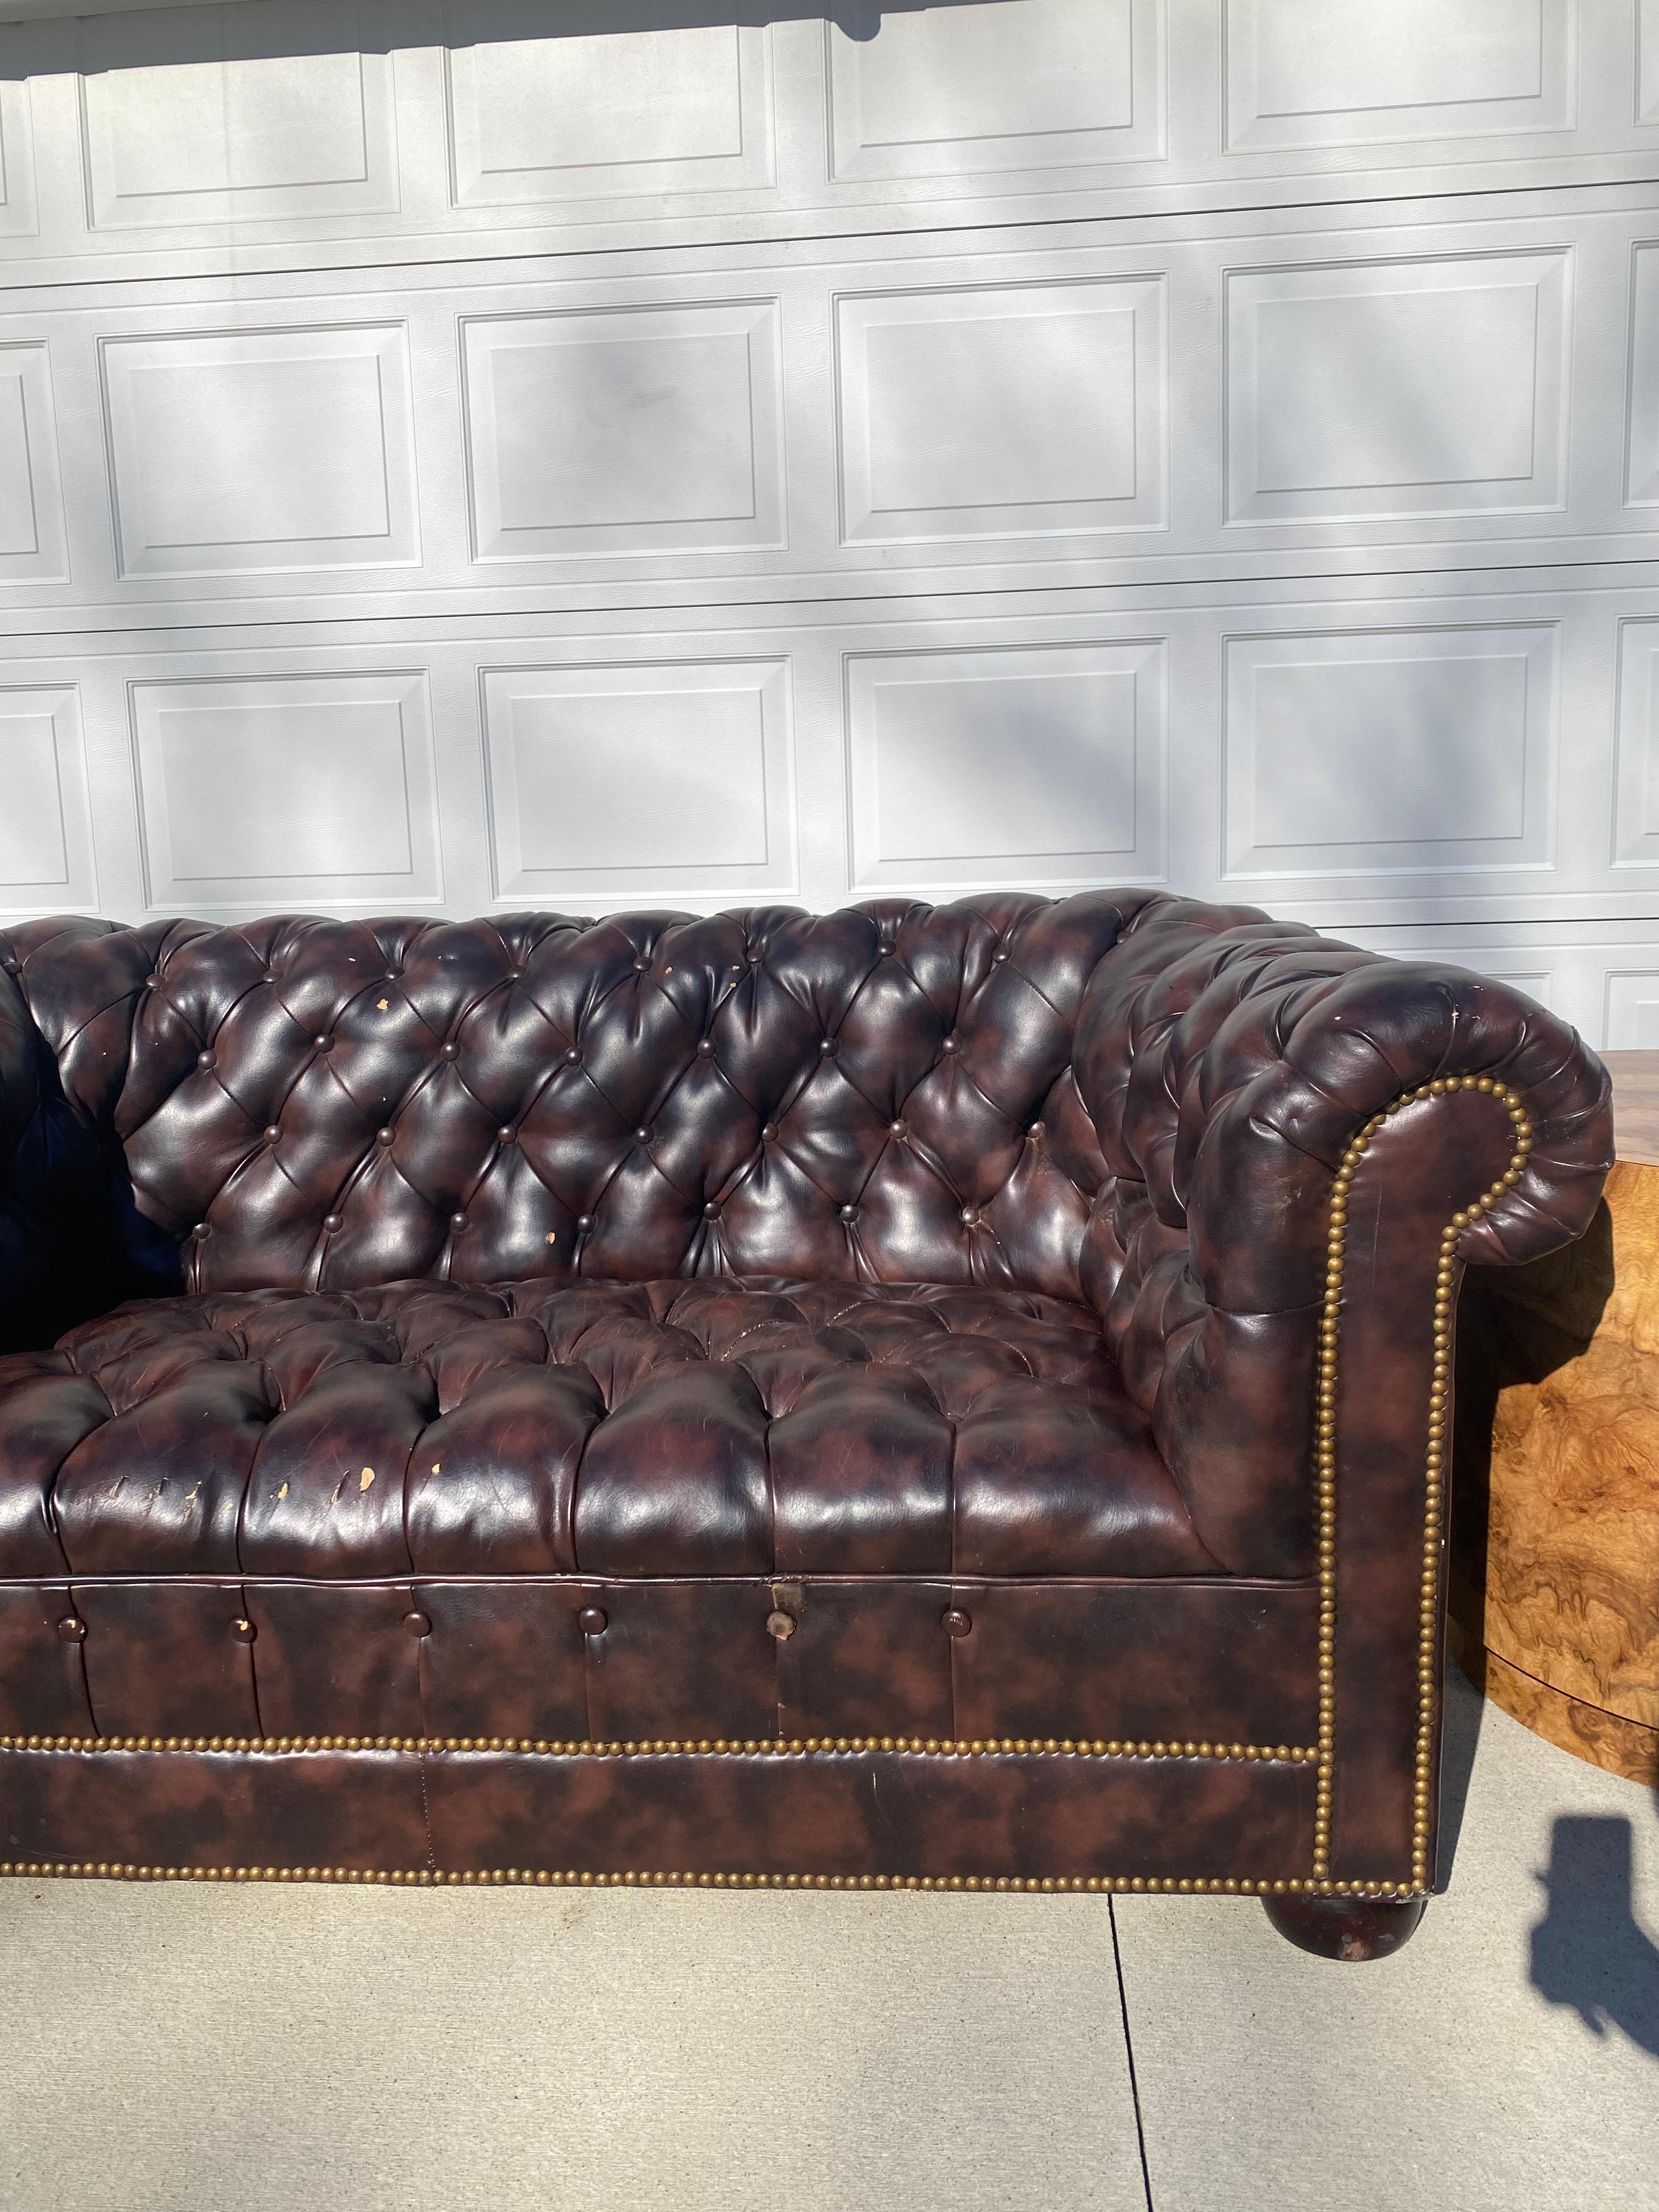 Chesterfield Sofa in Vegan Leather. This piece does need to be reupholstered. See photos. It is a beauty though, with some TLC, this will be a great addition to your home library, bar or any room in your home.